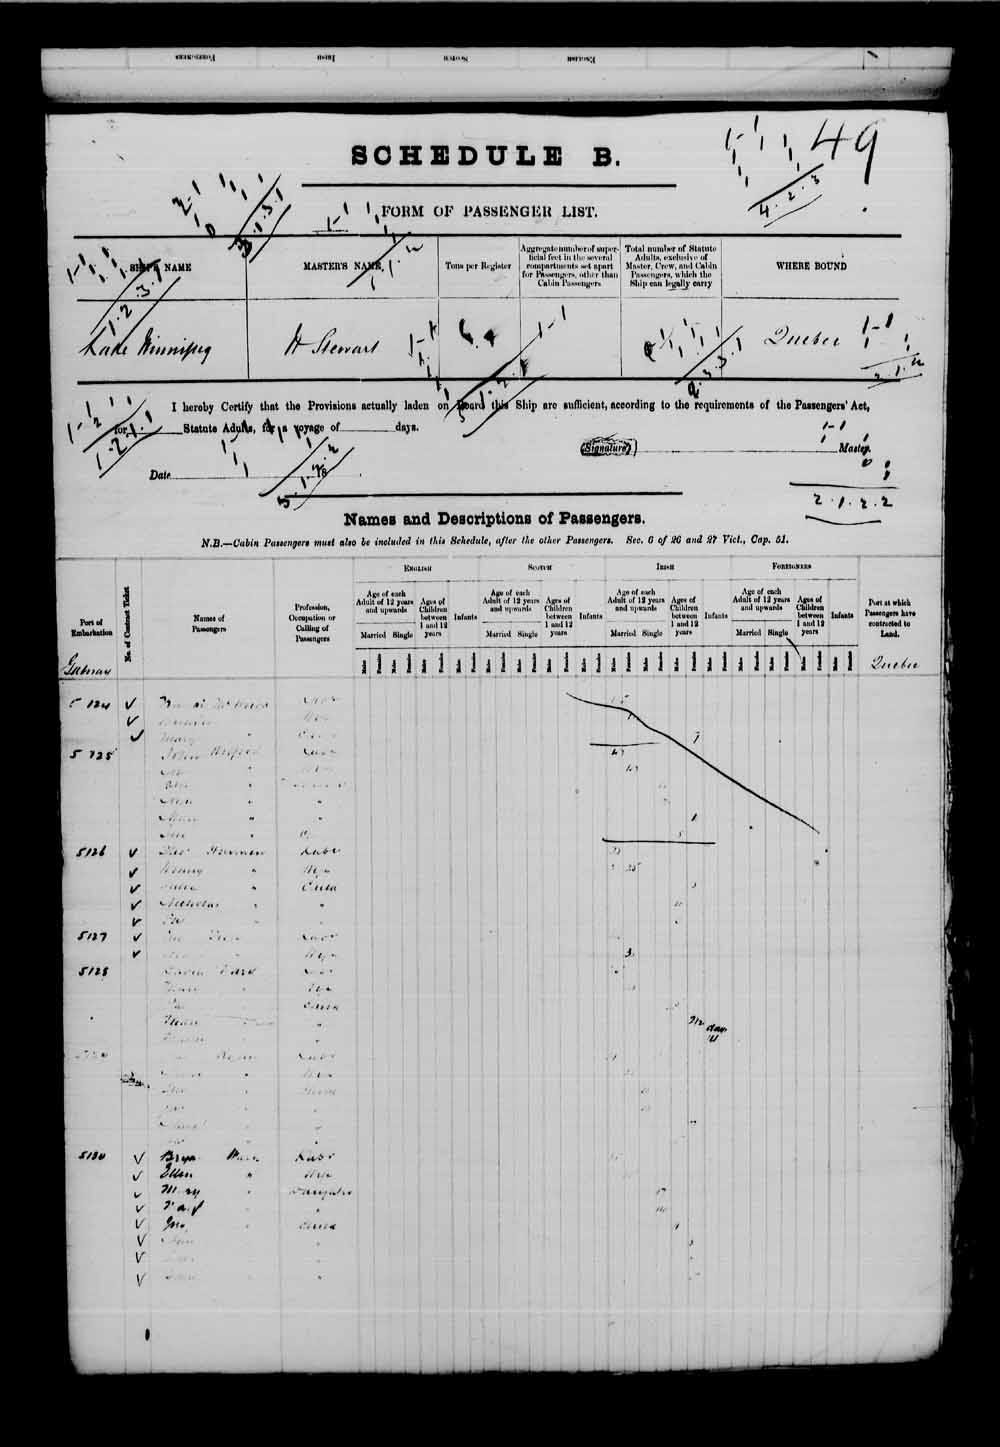 Digitized page of Passenger Lists for Image No.: e003543404